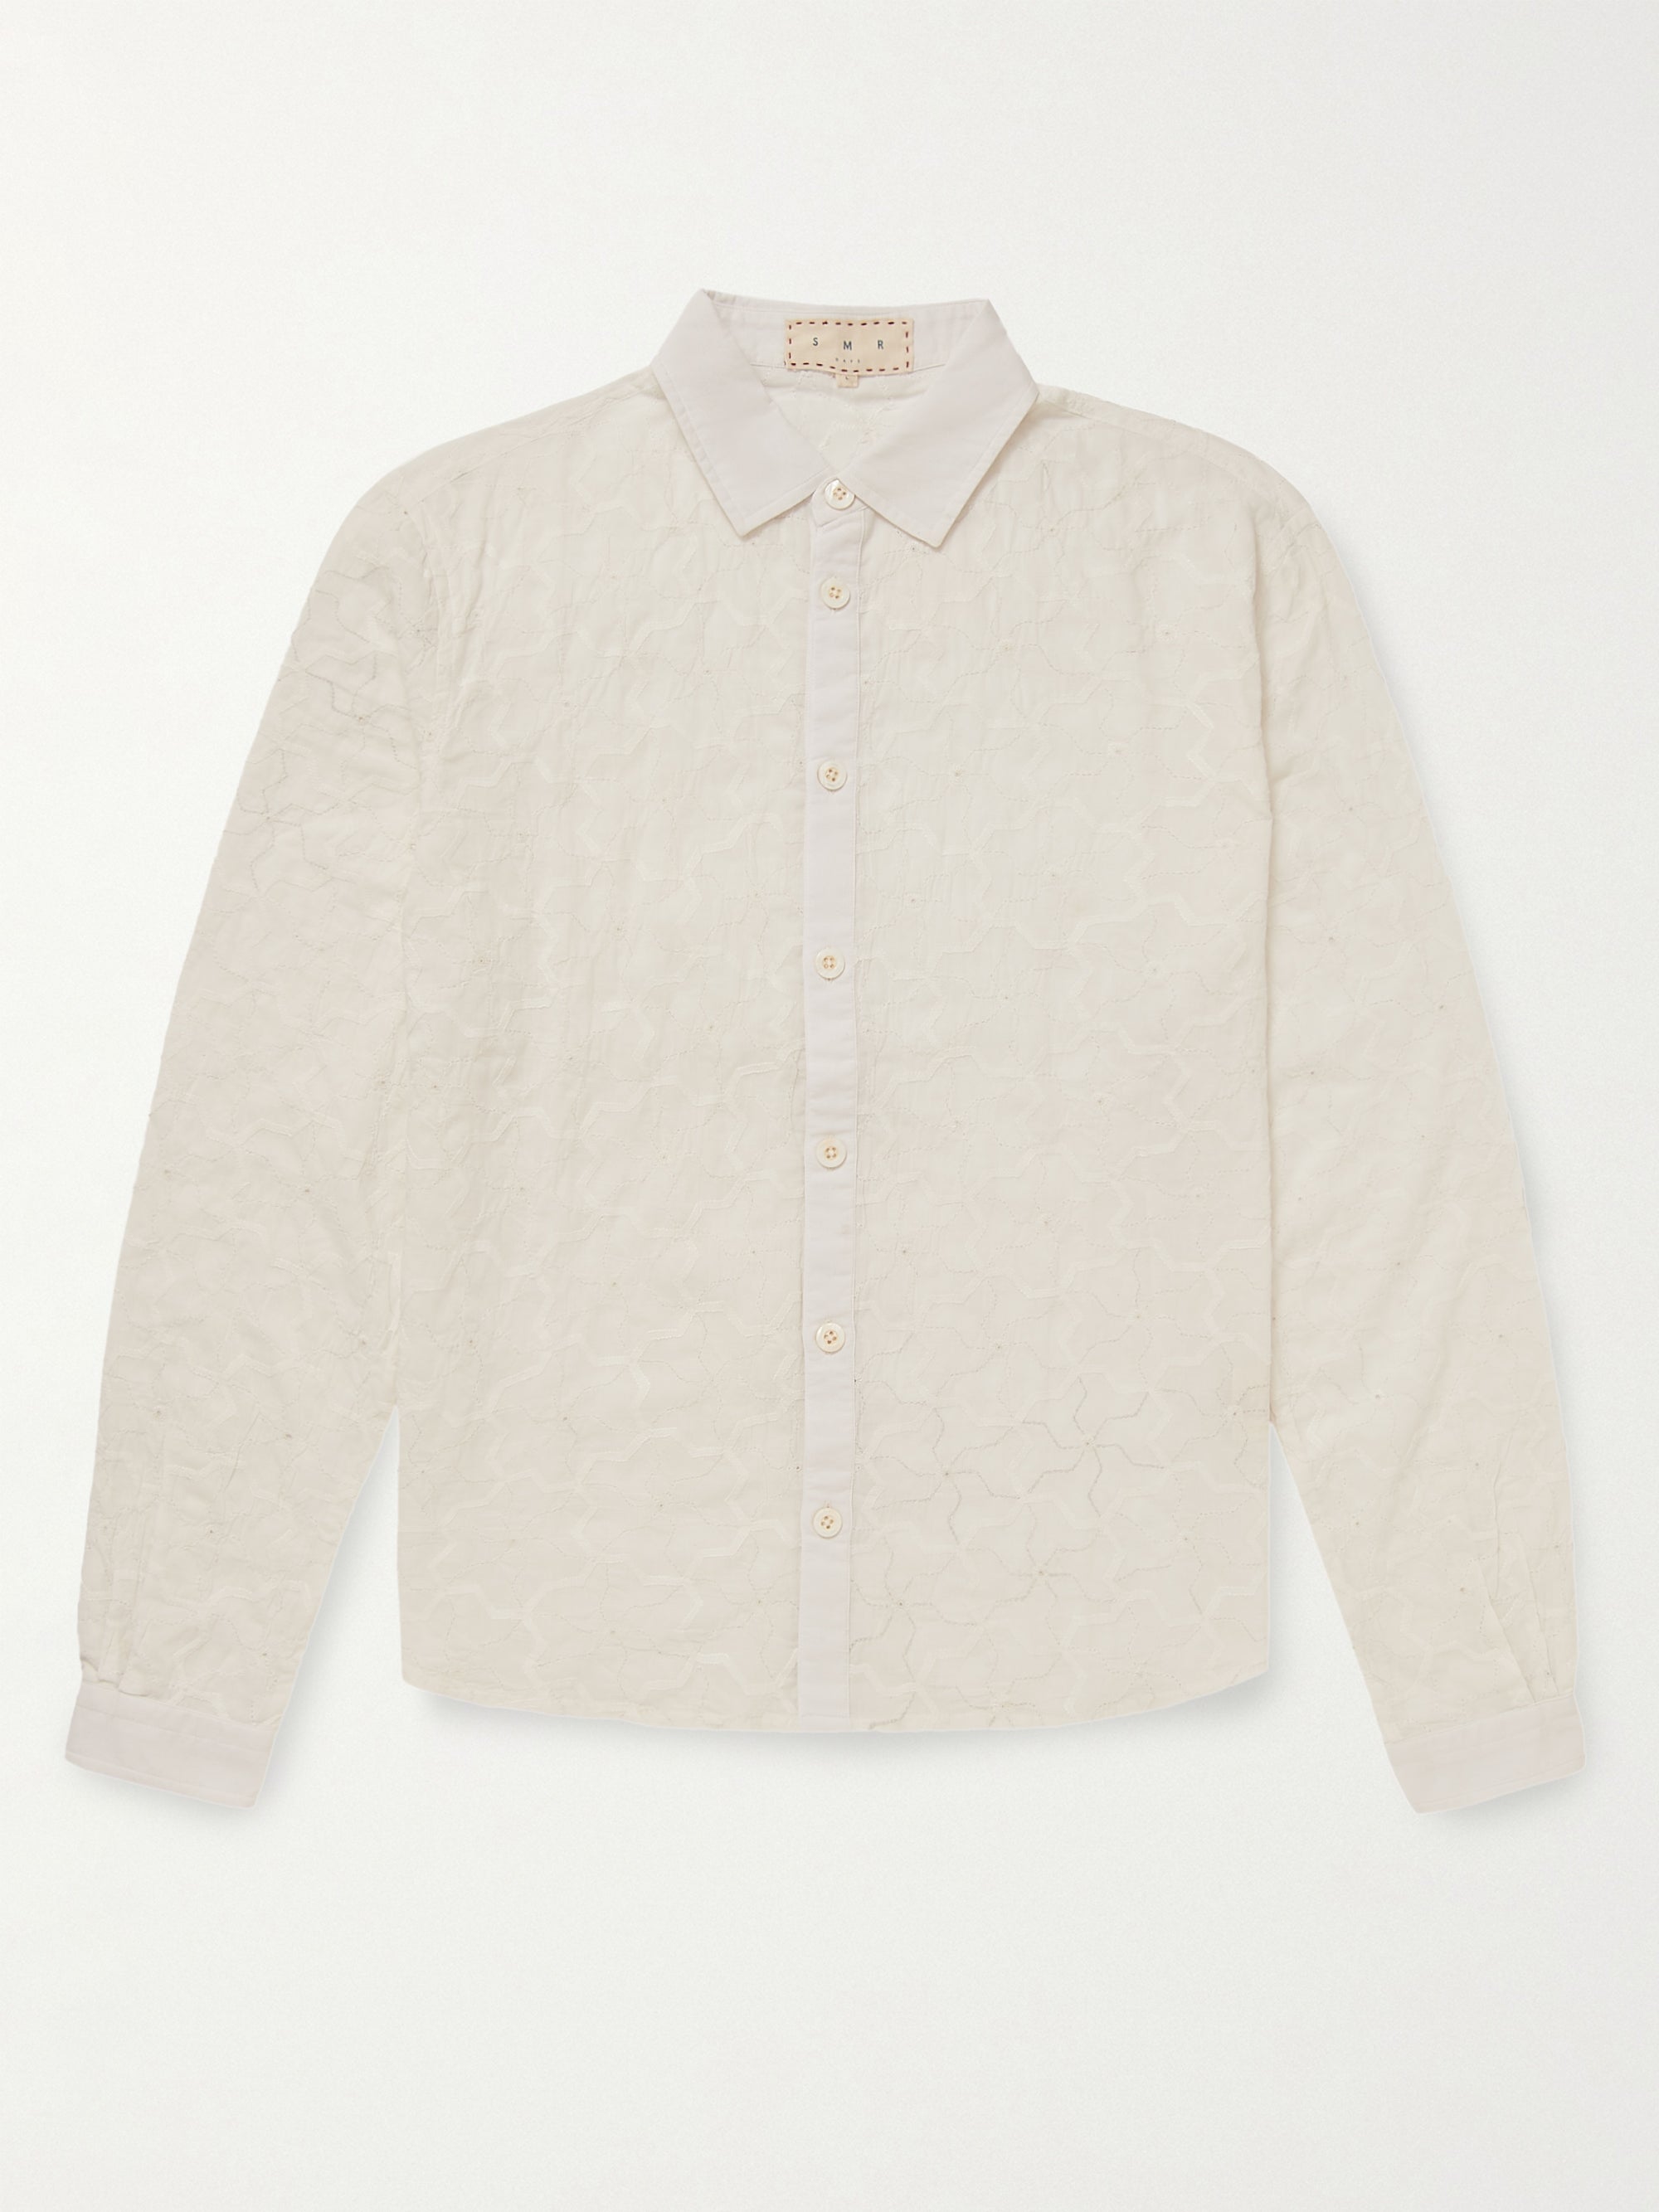 Holbox Shirt in White